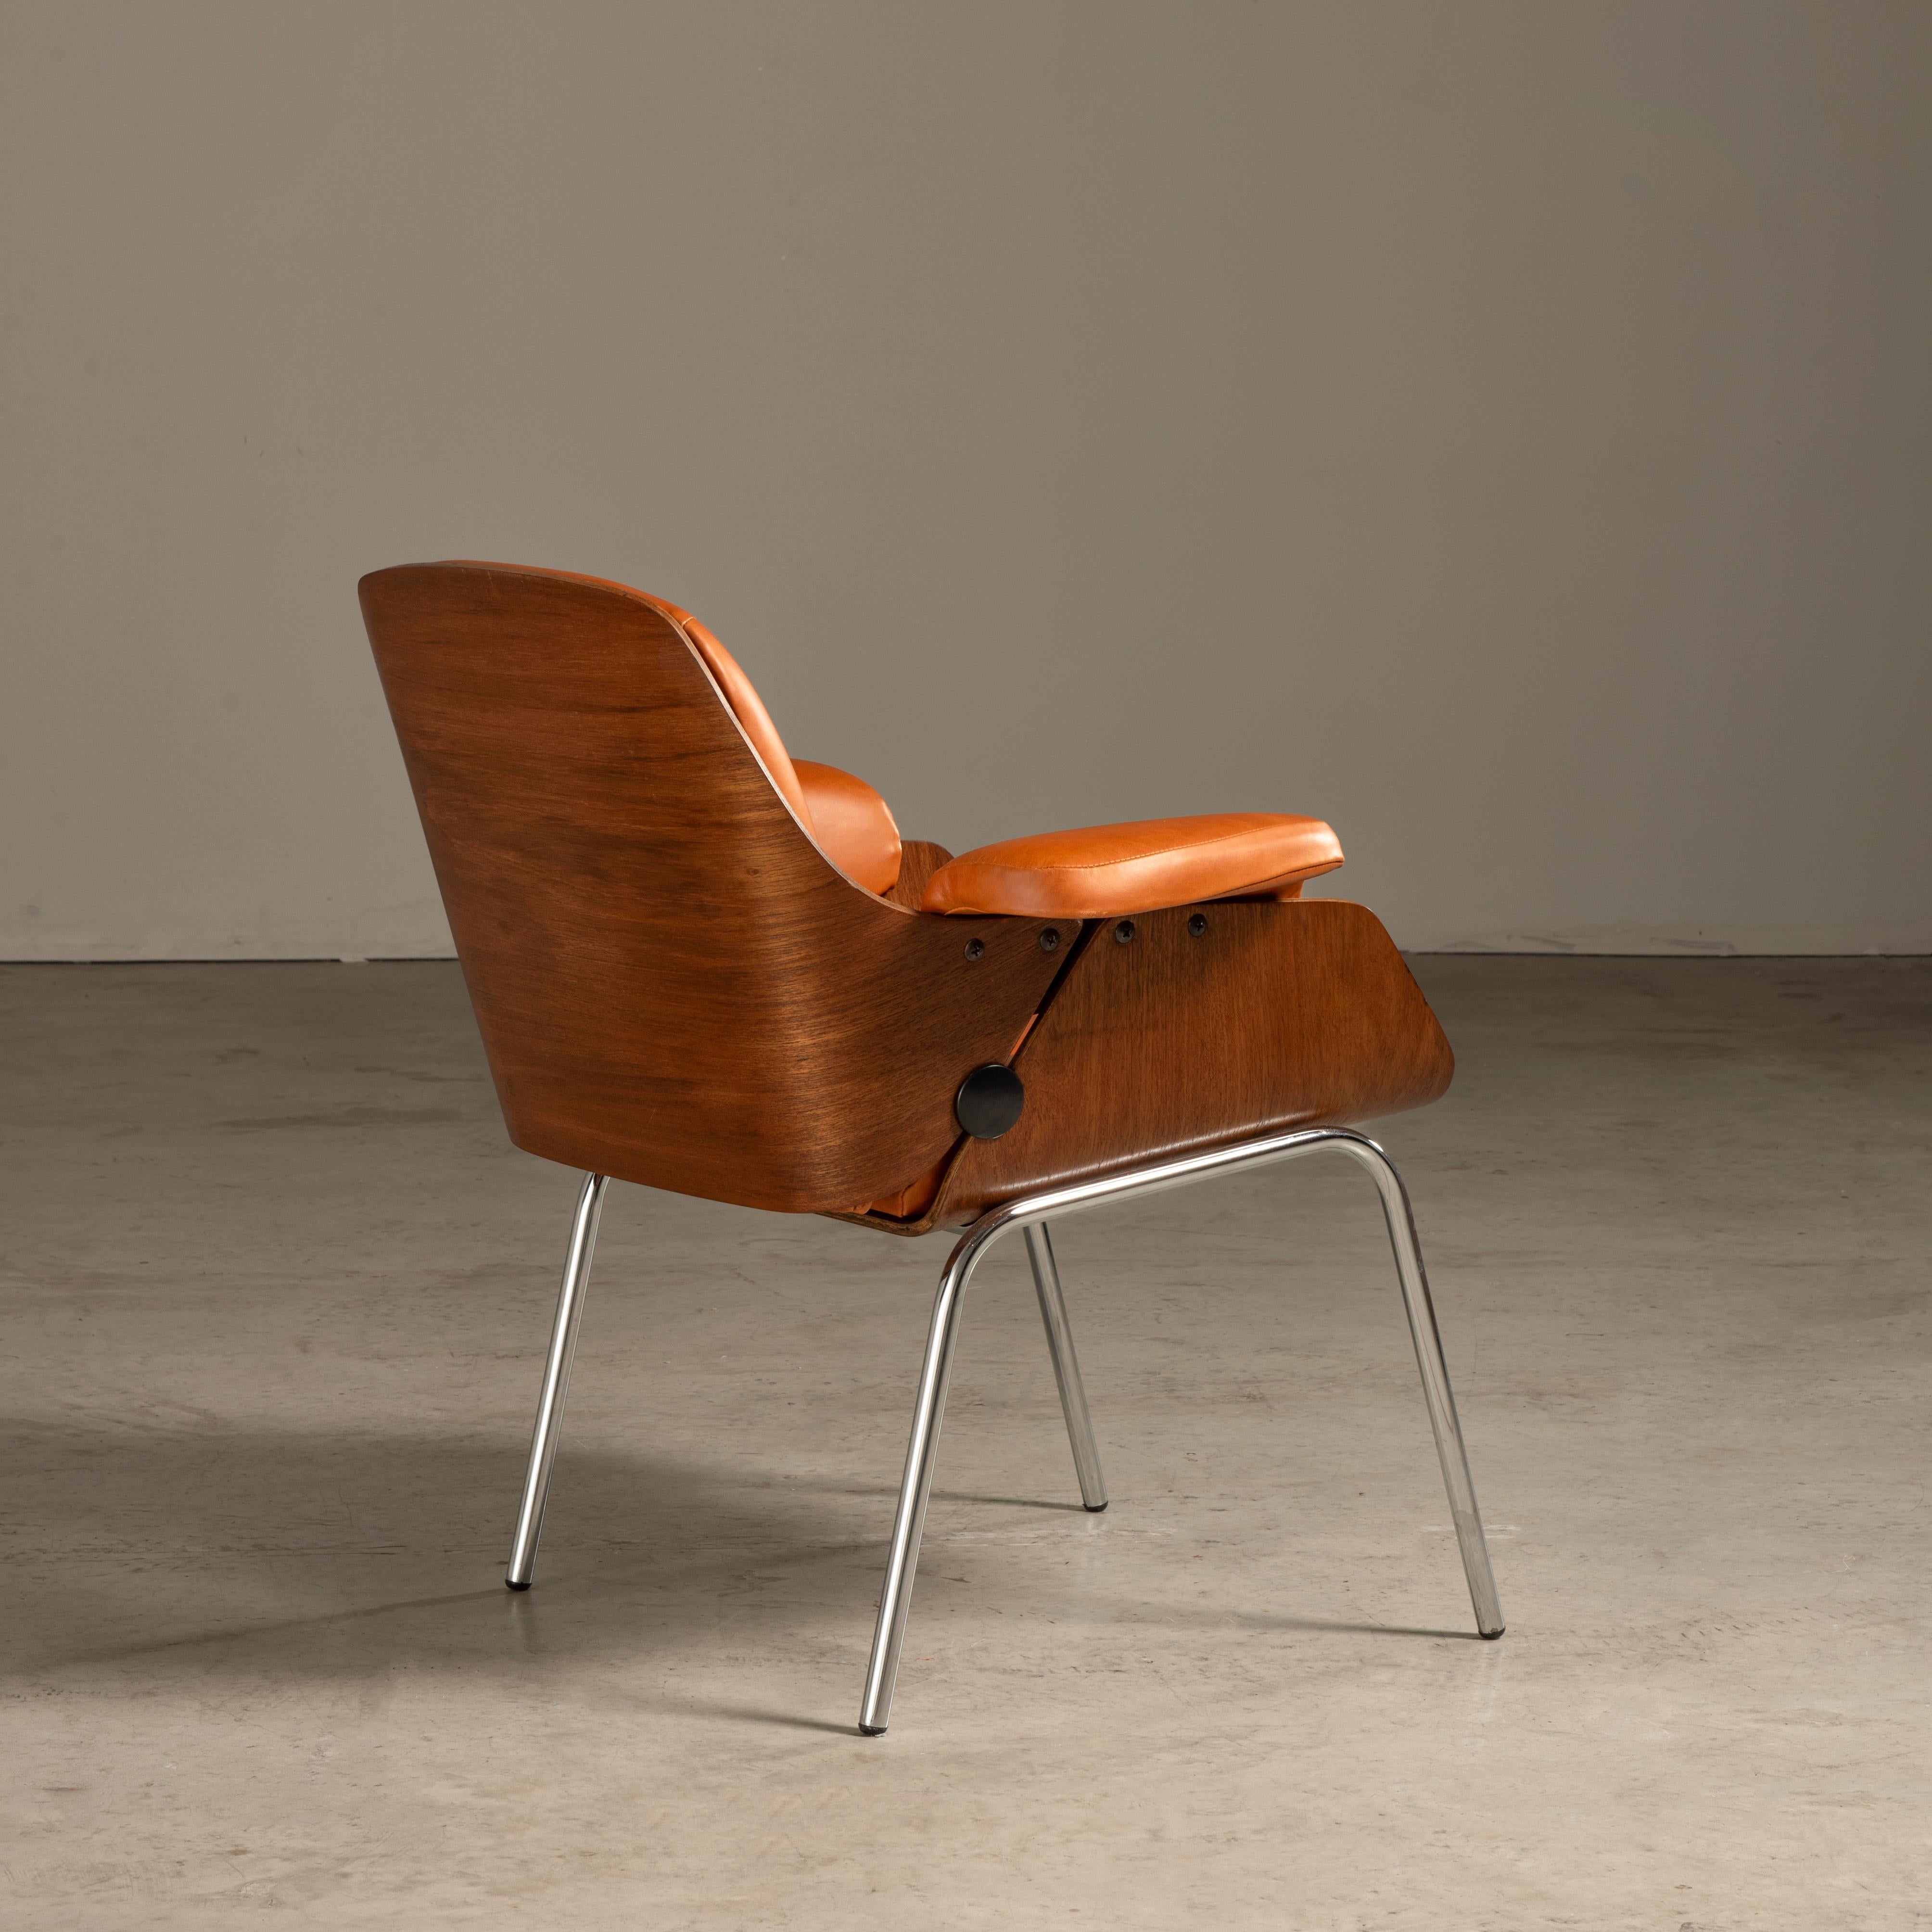 This armchair designed by Carlo Fongaro is an exemplary piece of mid-20th-century Brazilian furniture design. The chair combines the use of wood and leather, materials commonly used in Brazilian furniture from that era, known for their durability